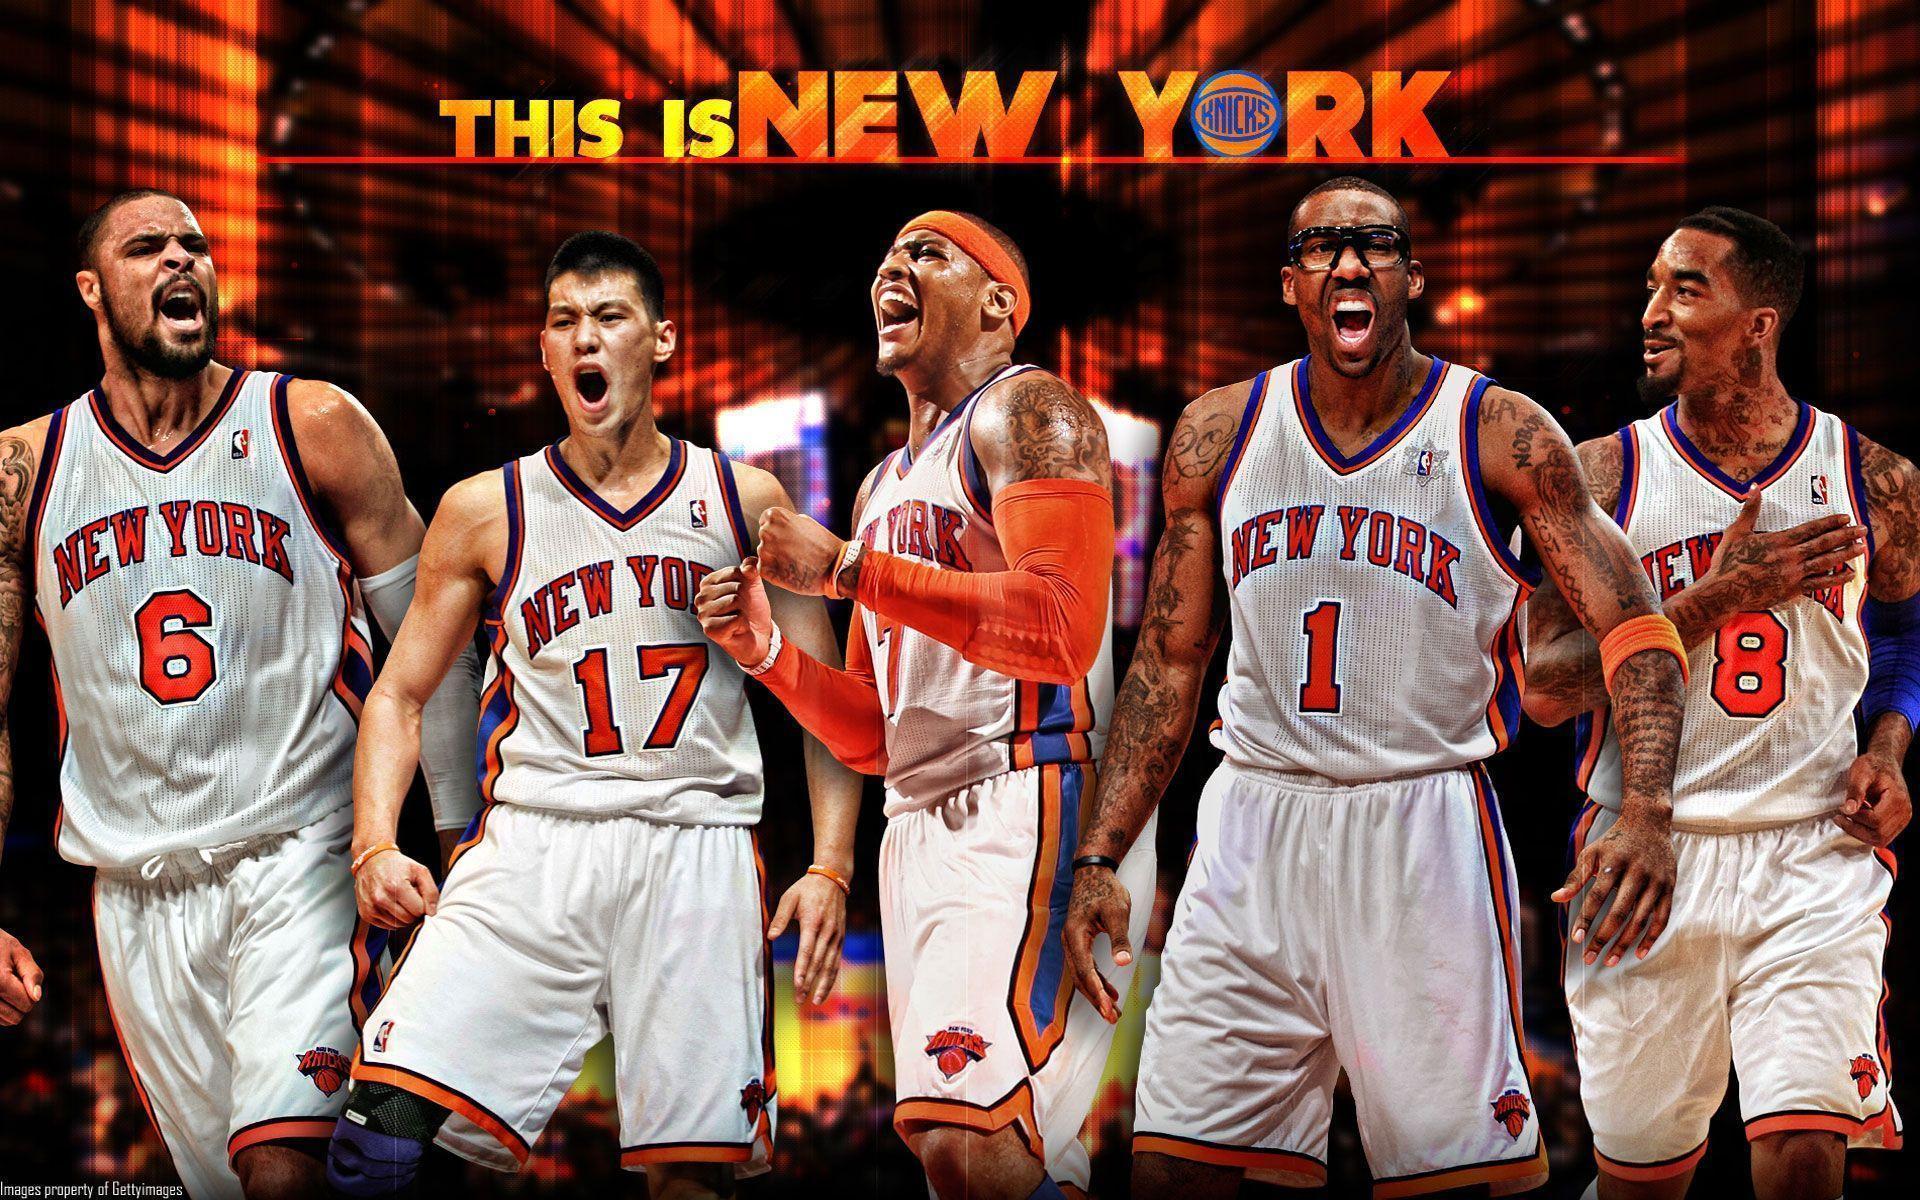 THIS IS NEW YORK! #Knicks. Knicks obsession. HD